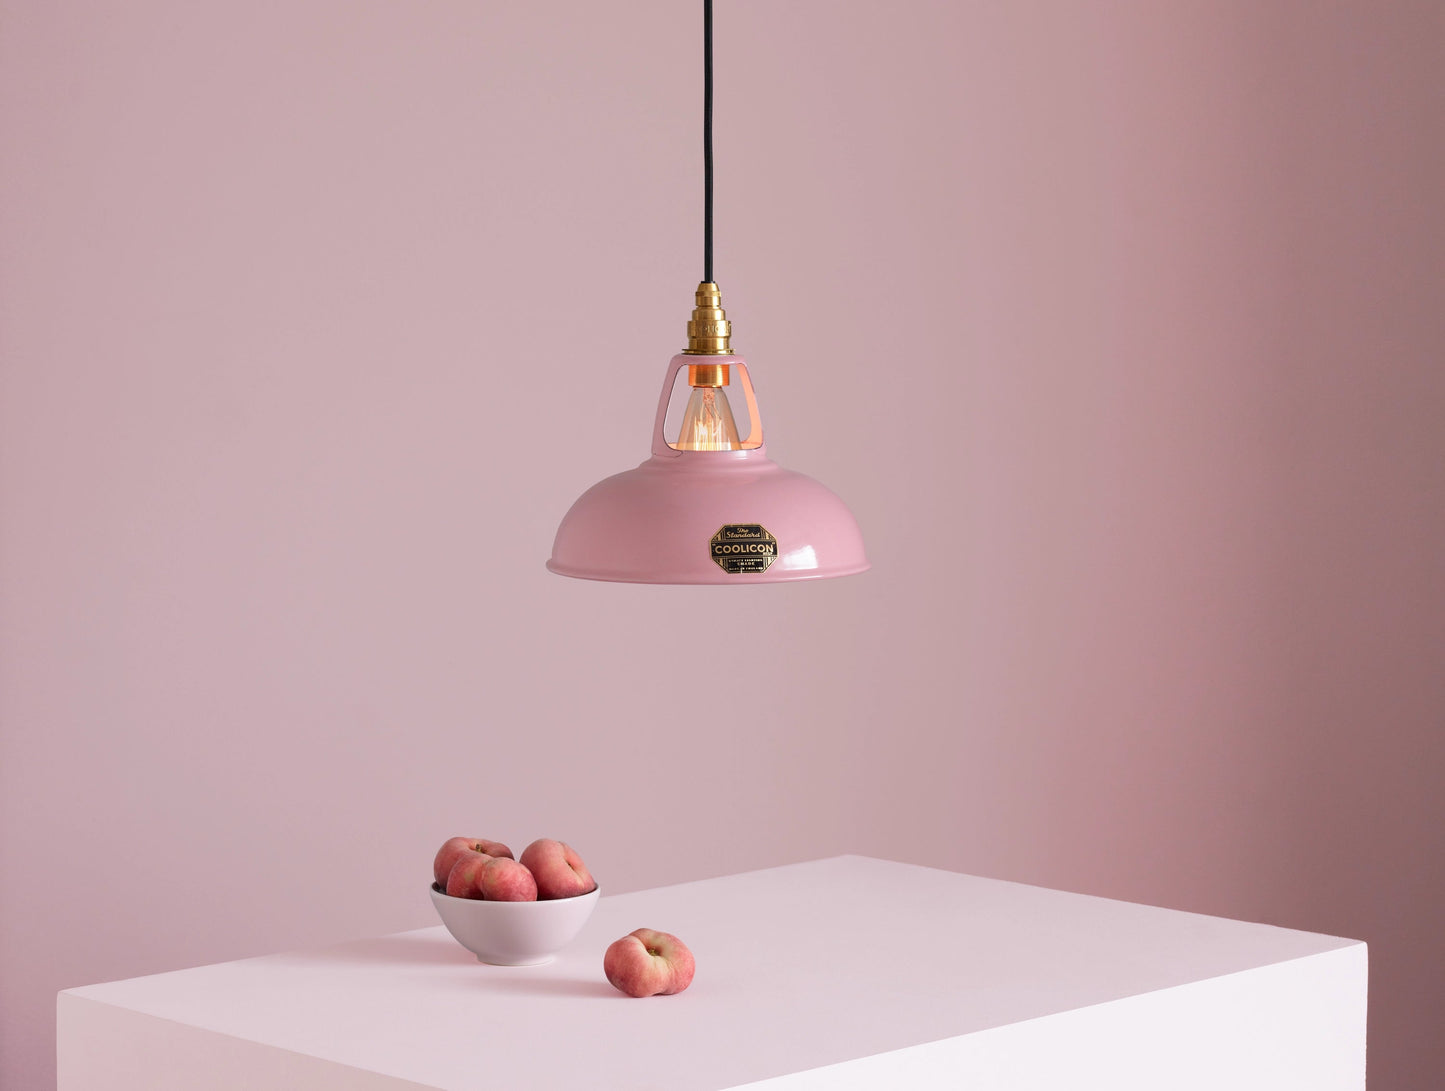 A Coolicon Powder Pink lampshade with a Brass pendant set hanging above a plinth with a bowl of flat peaches.